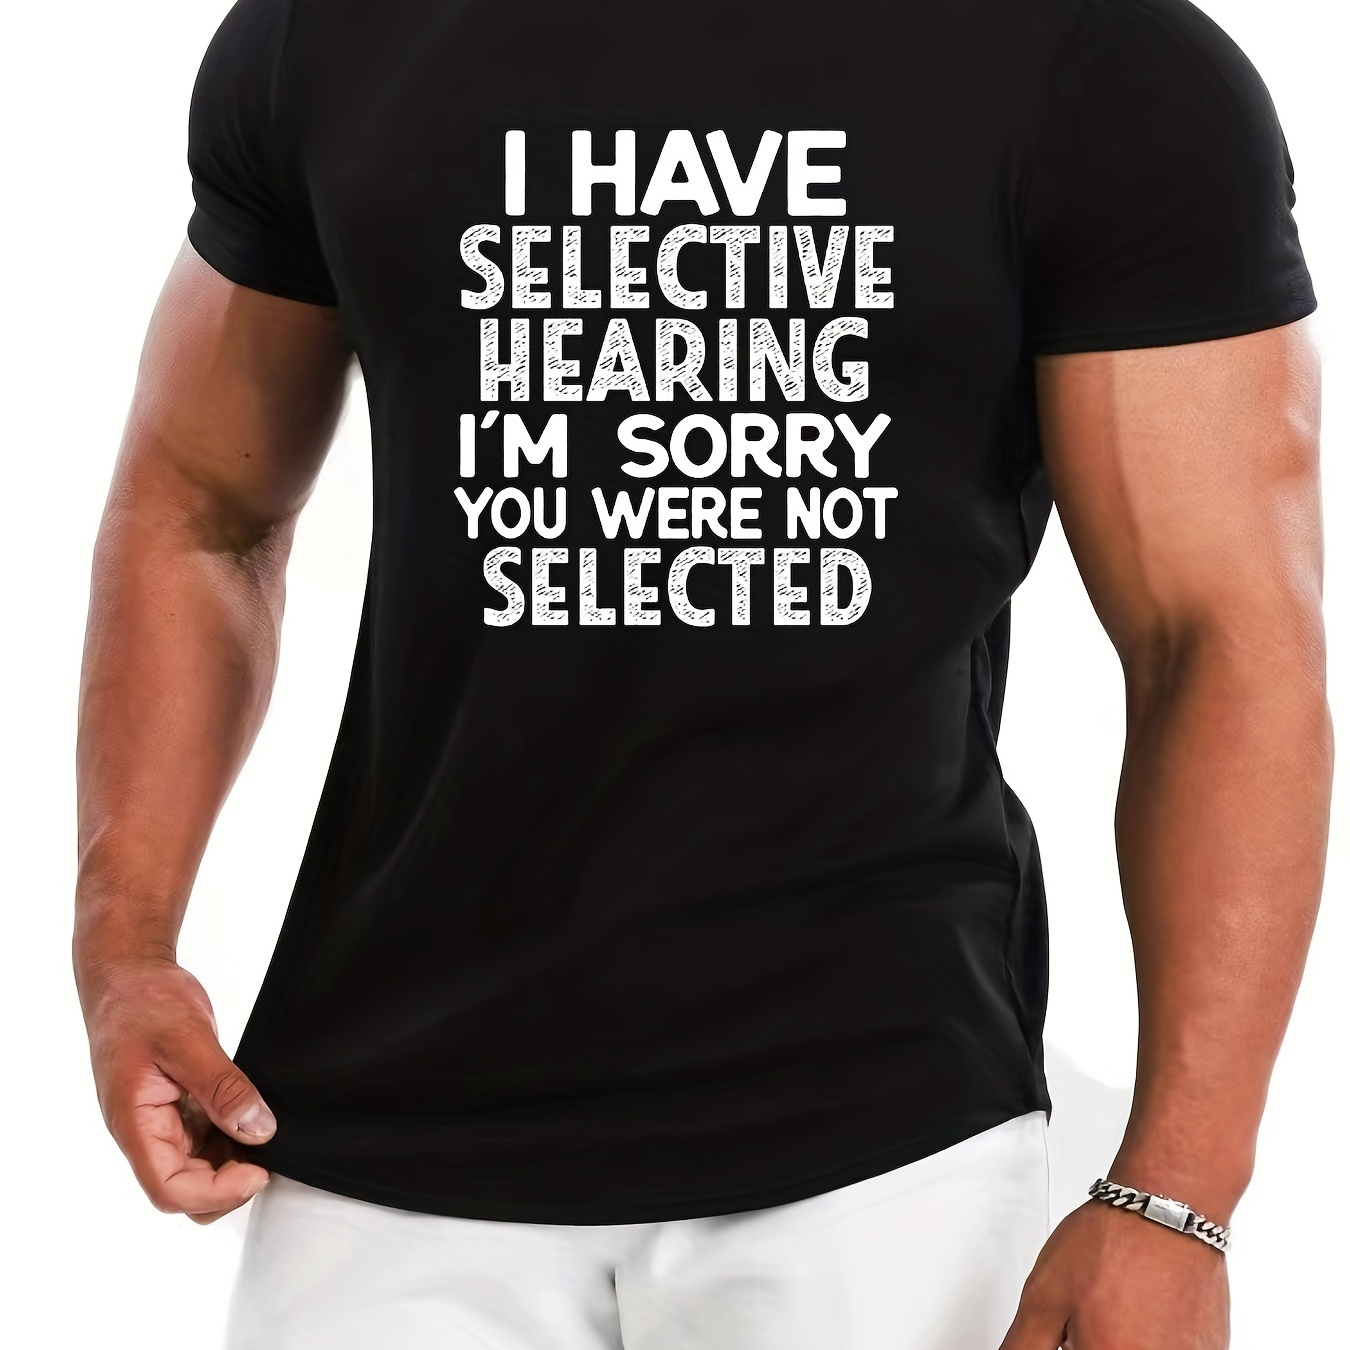 

i'm Sorry You Are Not Selected" Graphic Print Men's Creative Top, Casual Slightly Stretch Short Sleeve Crew Neck T-shirt, Men's Tee For Summer